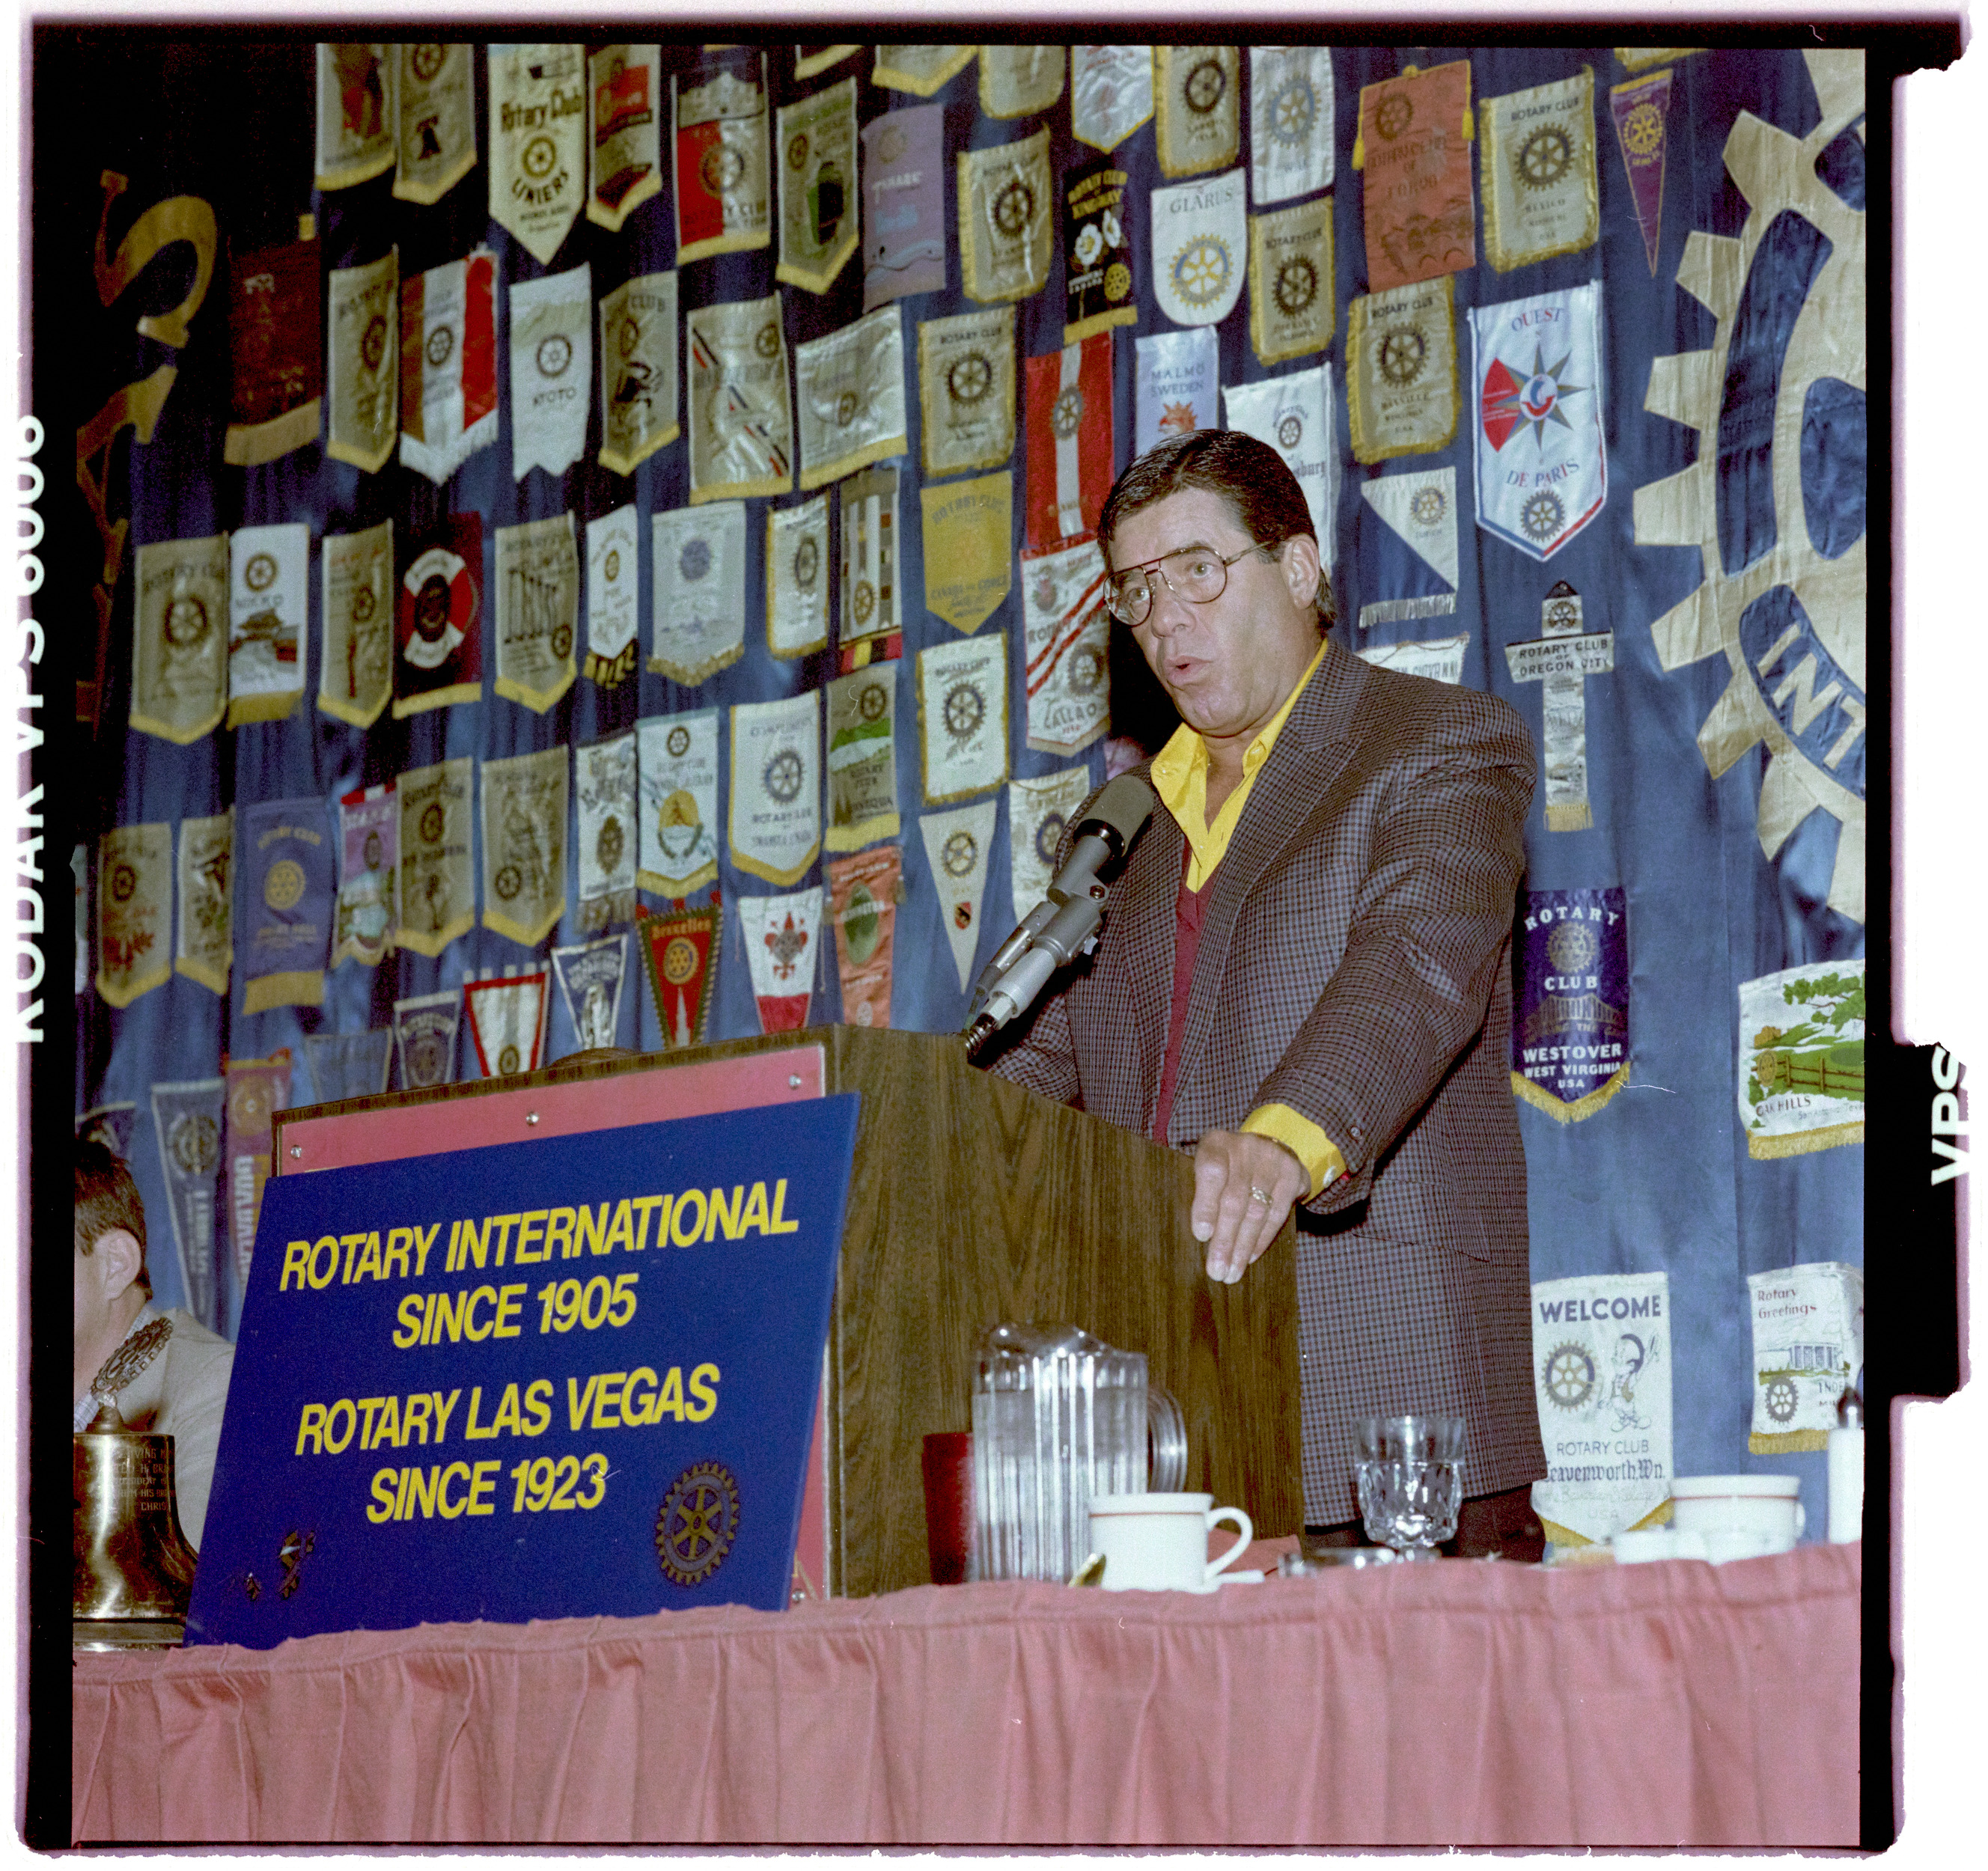 Photographs of Las Vegas Rotary Jerry Lewis, image 05